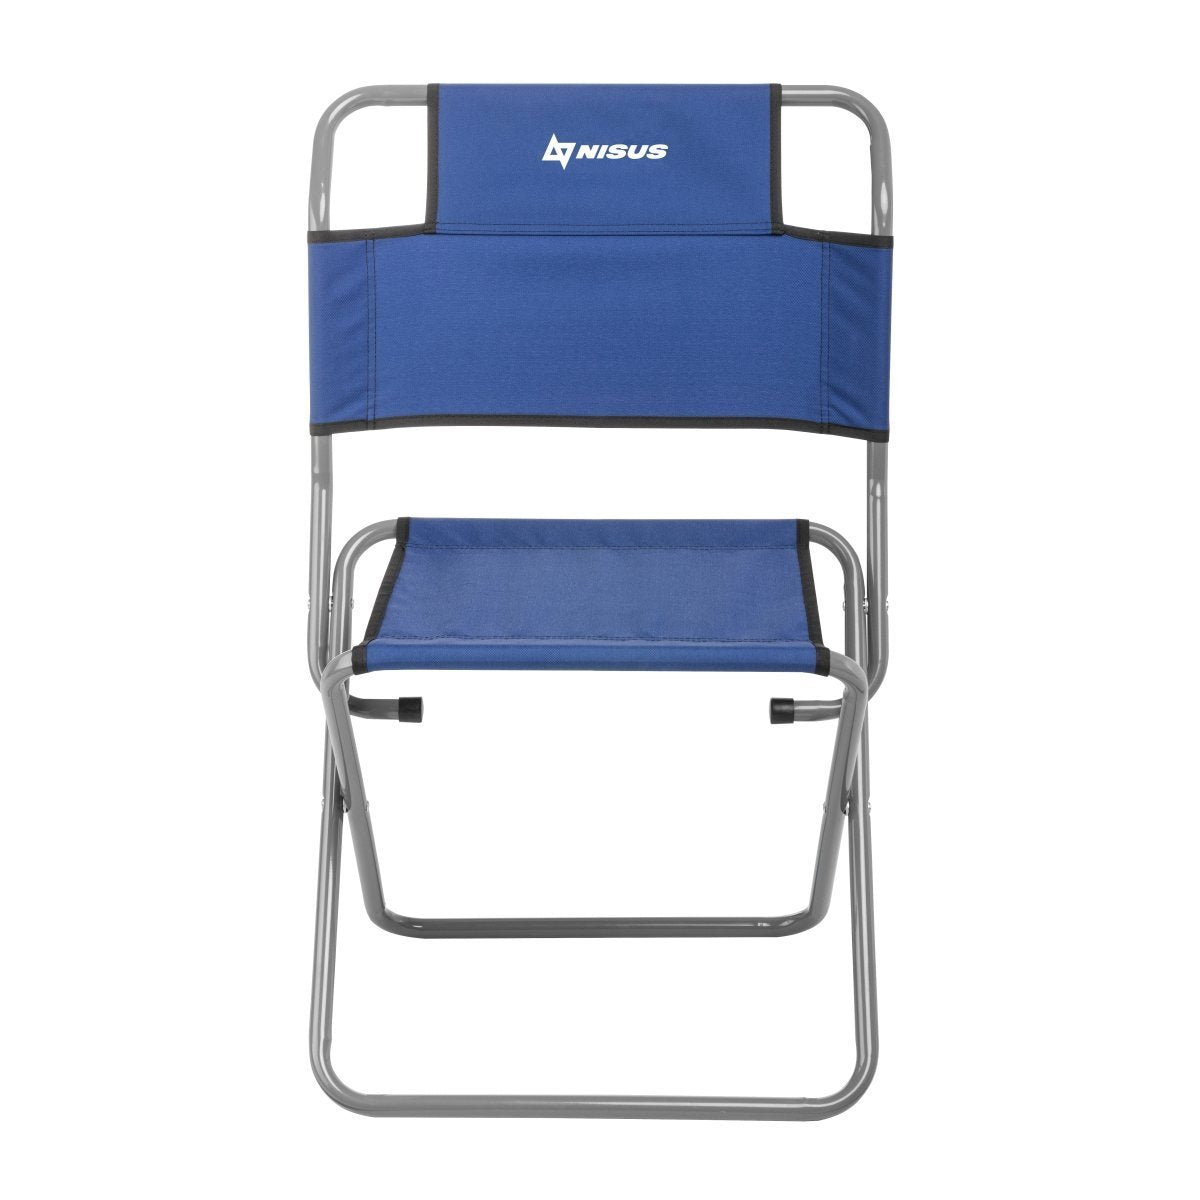 Nisus blue folding camping chair with support